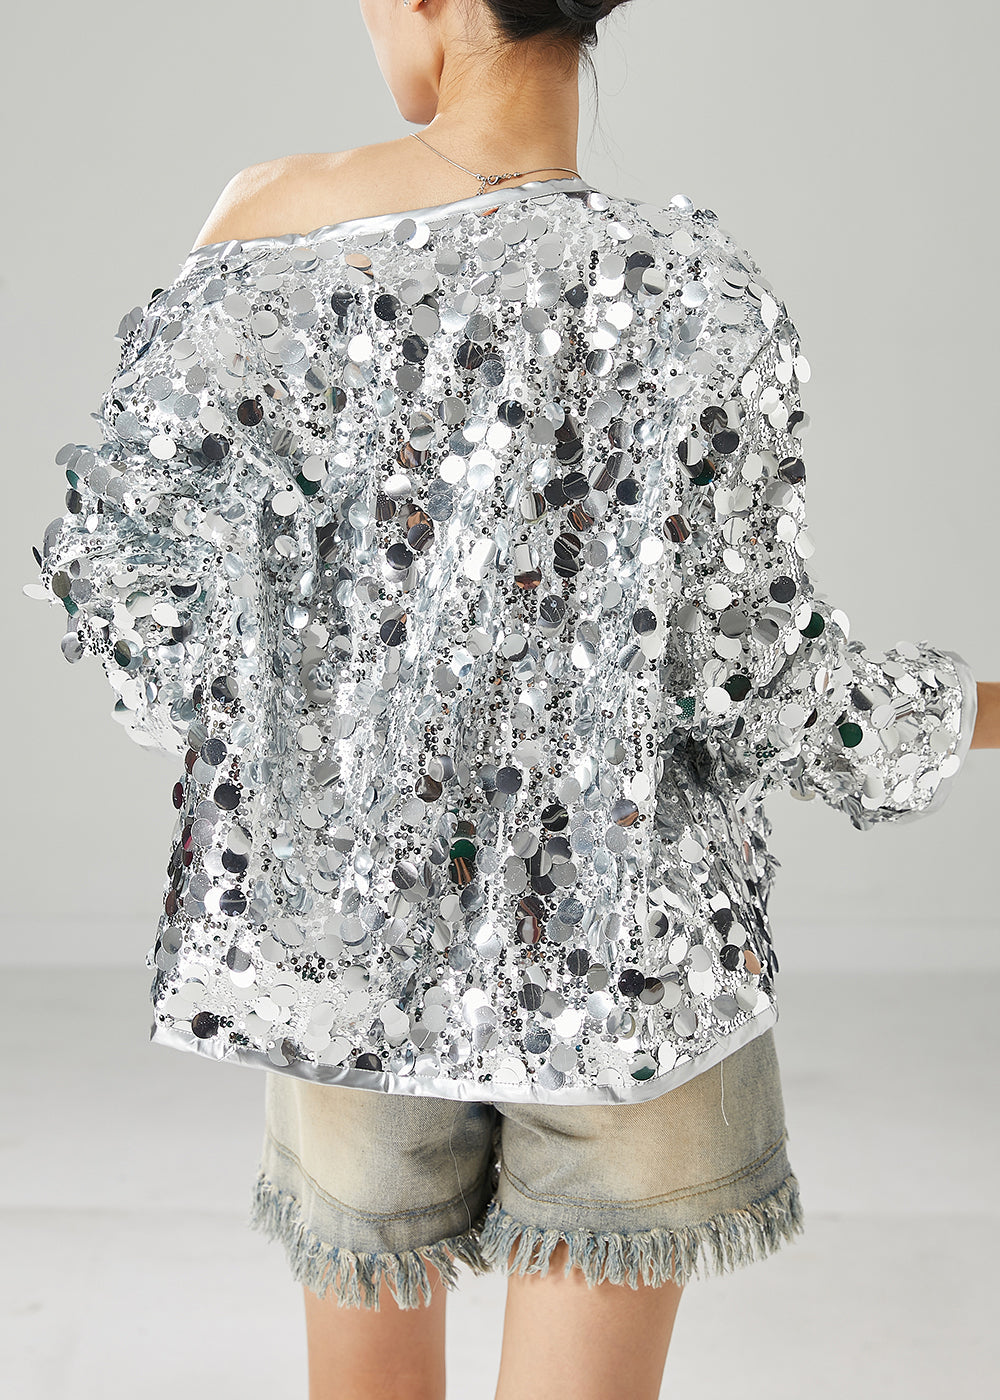 Silvery Oversized Coats Sequins Spring